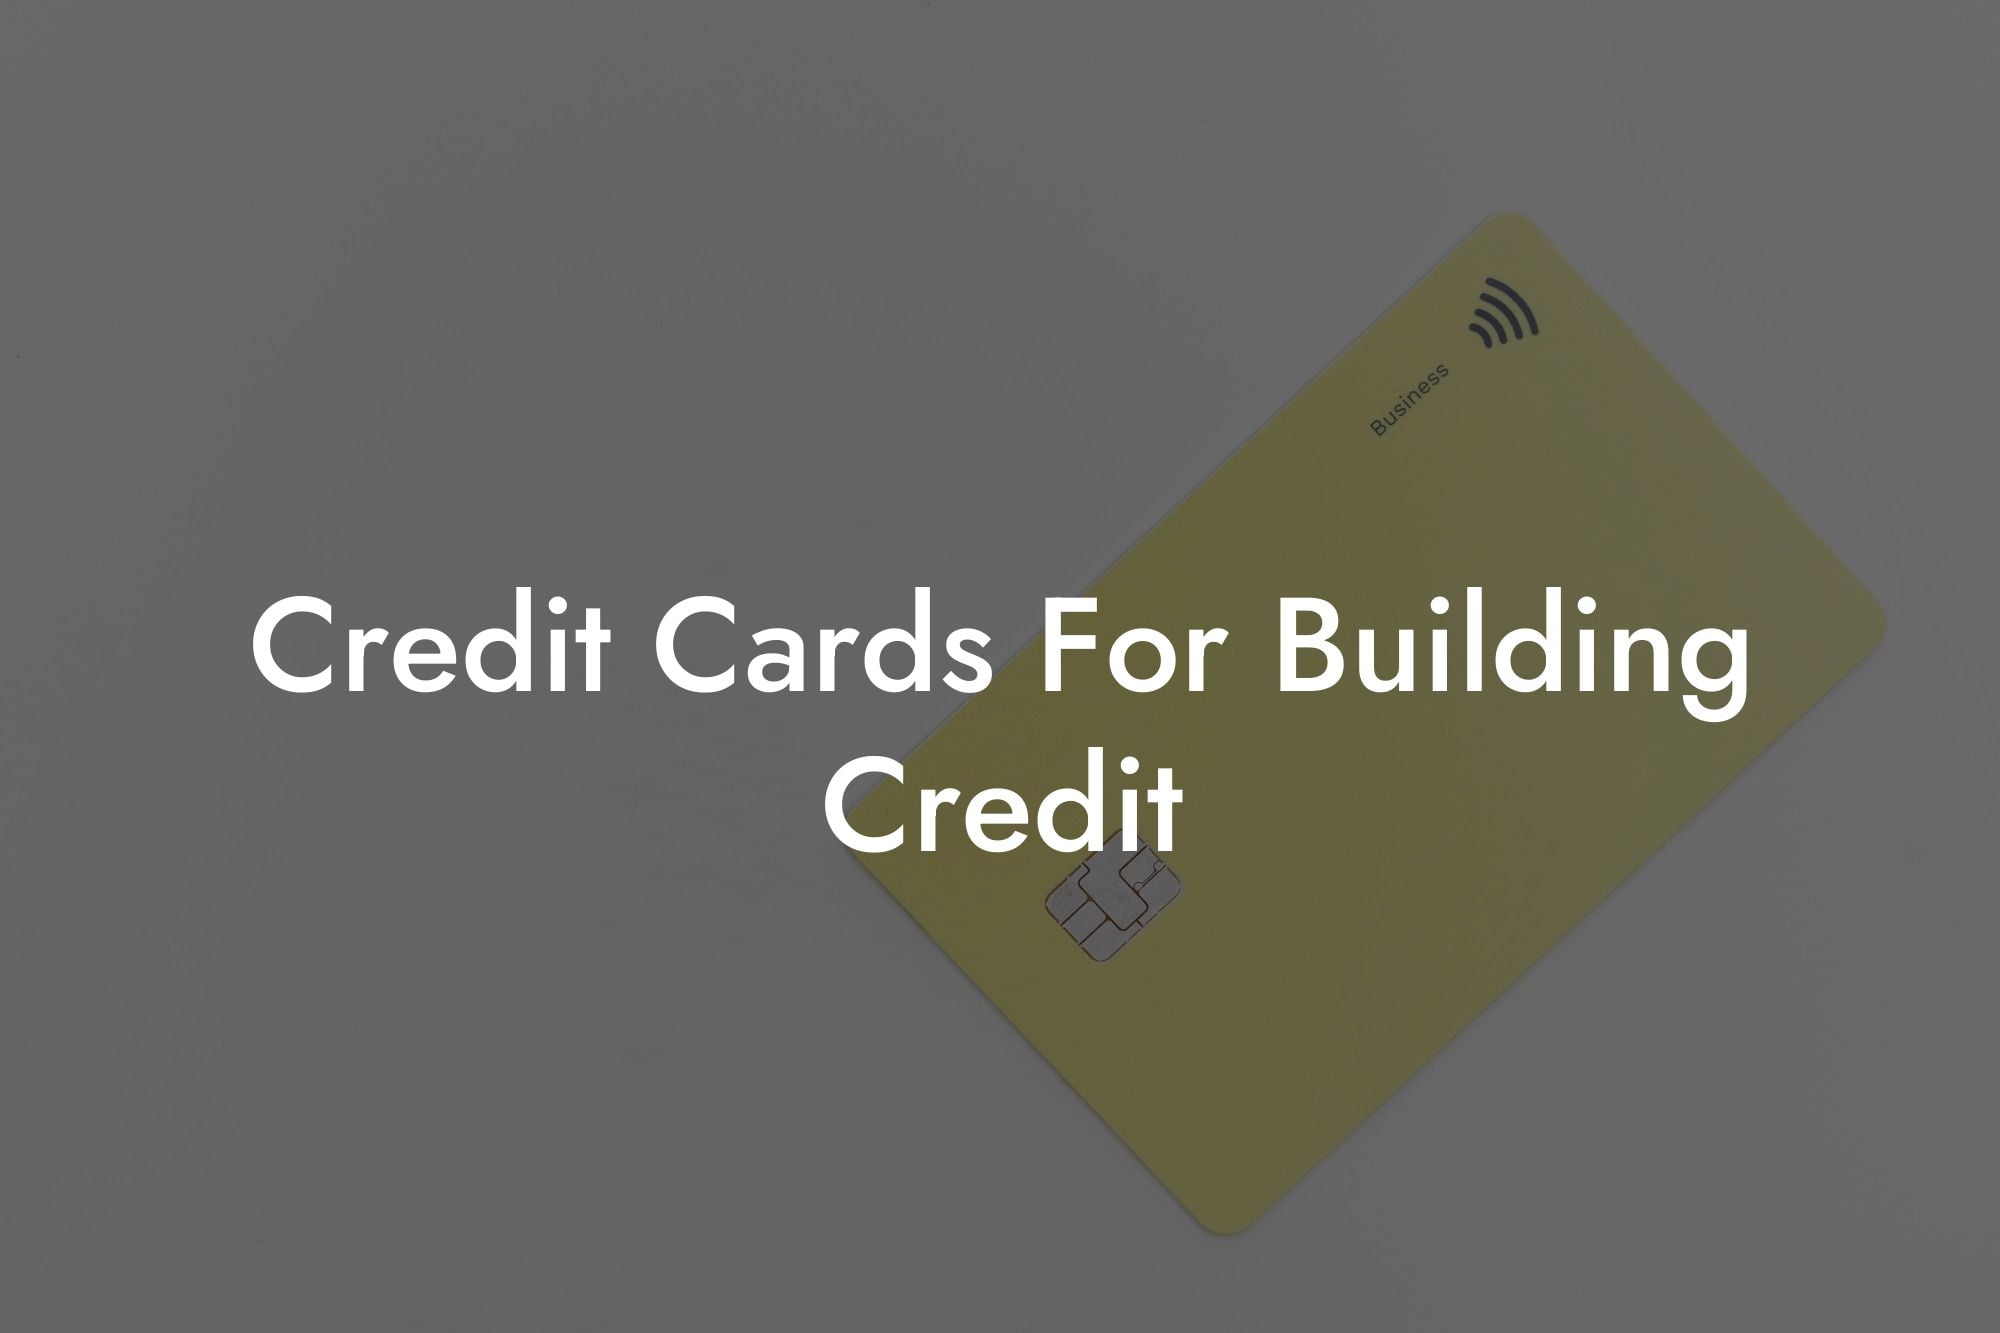 Credit Cards For Building Credit